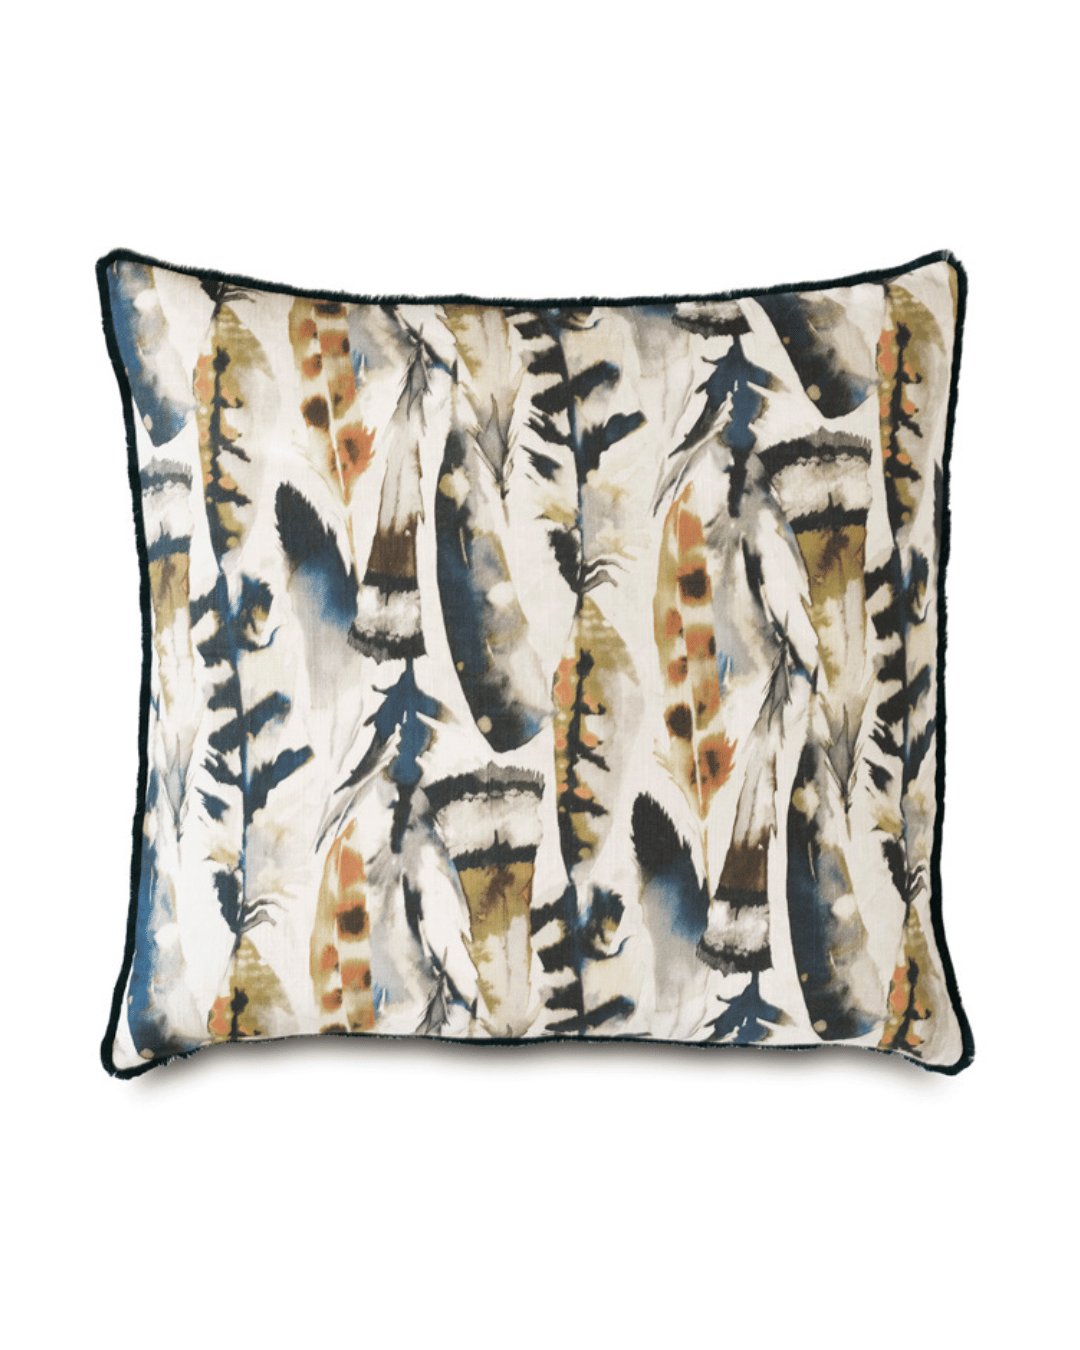 Feather Watercolor Decorative Pillow 22x22